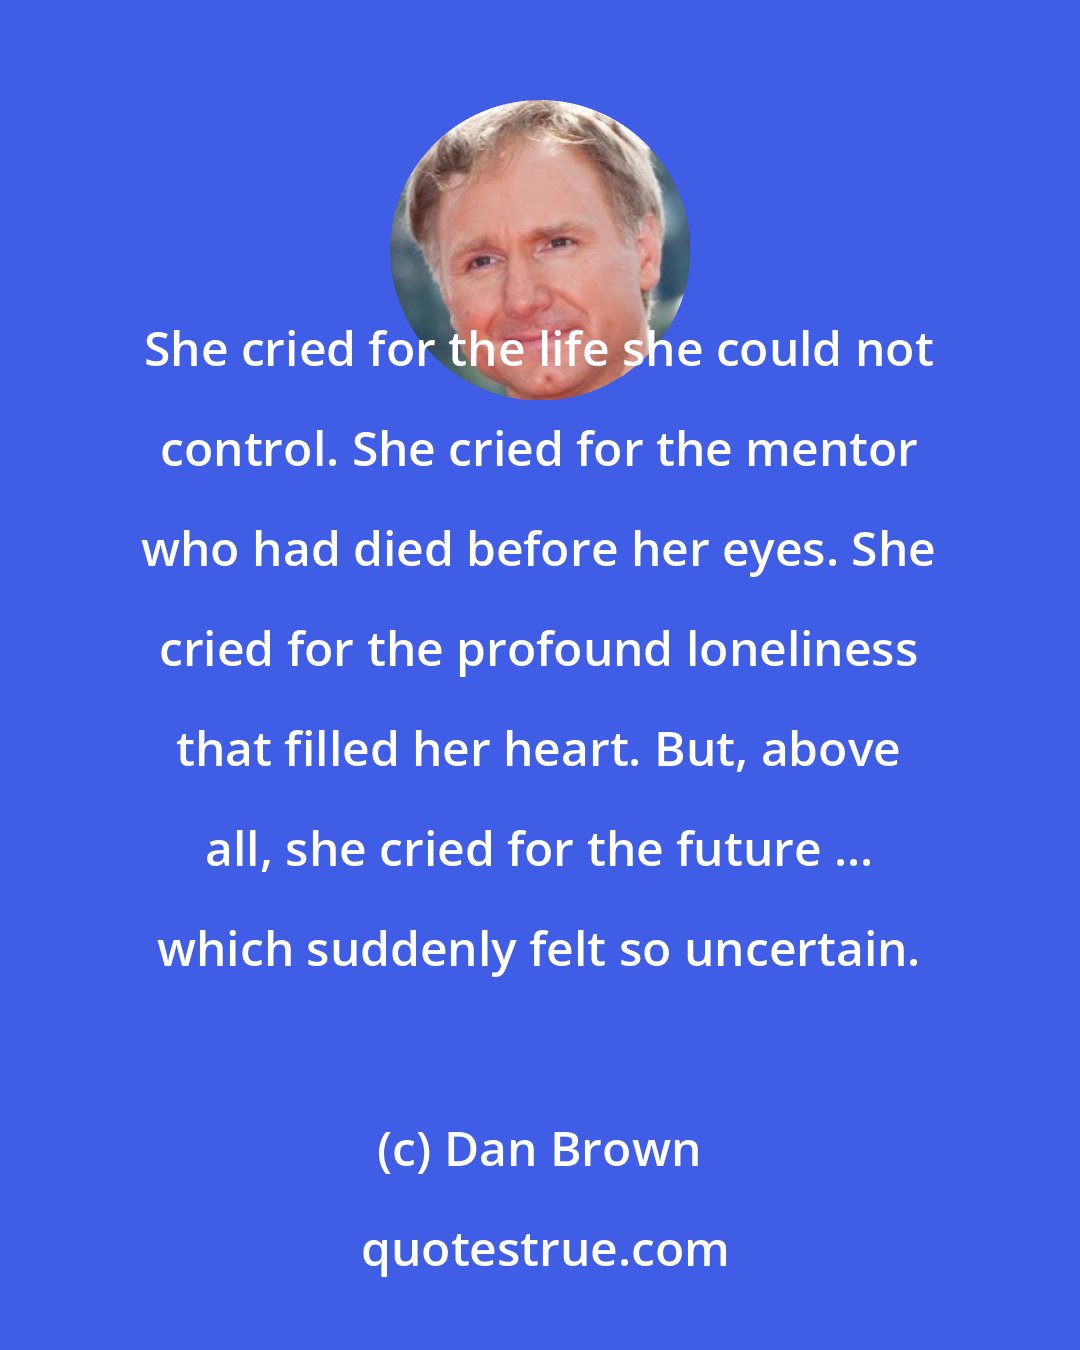 Dan Brown: She cried for the life she could not control. She cried for the mentor who had died before her eyes. She cried for the profound loneliness that filled her heart. But, above all, she cried for the future ... which suddenly felt so uncertain.